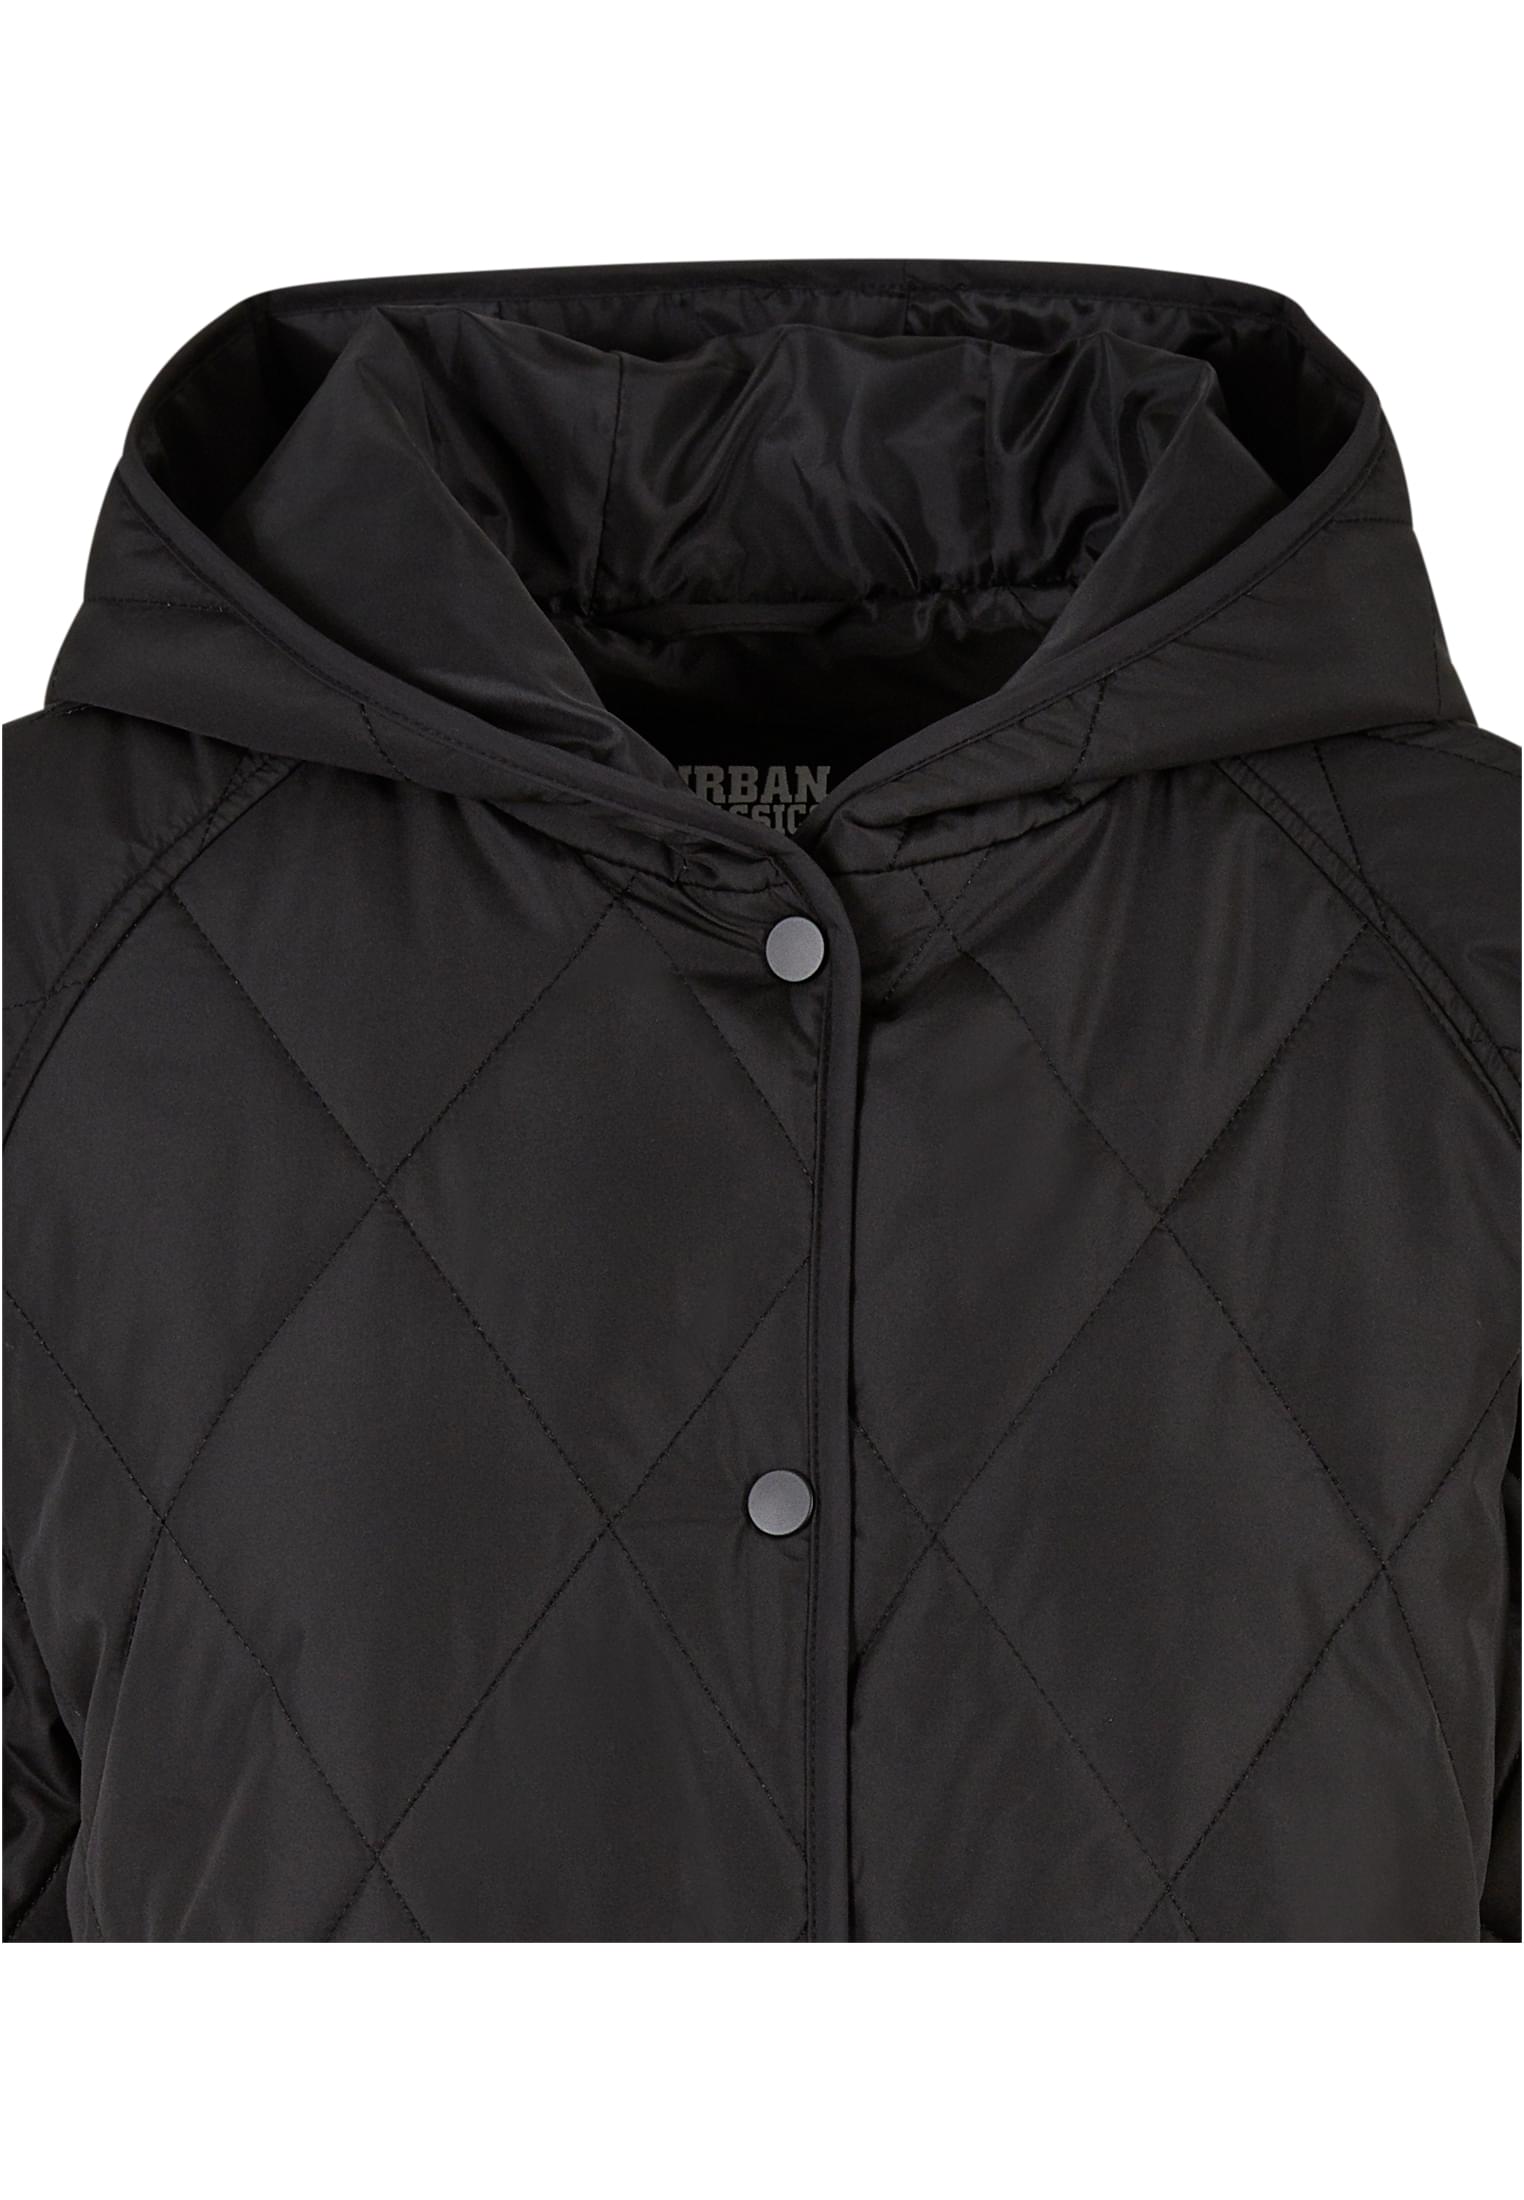 Jacket-TB6067 Ladies Diamond Oversized Hooded Quilted